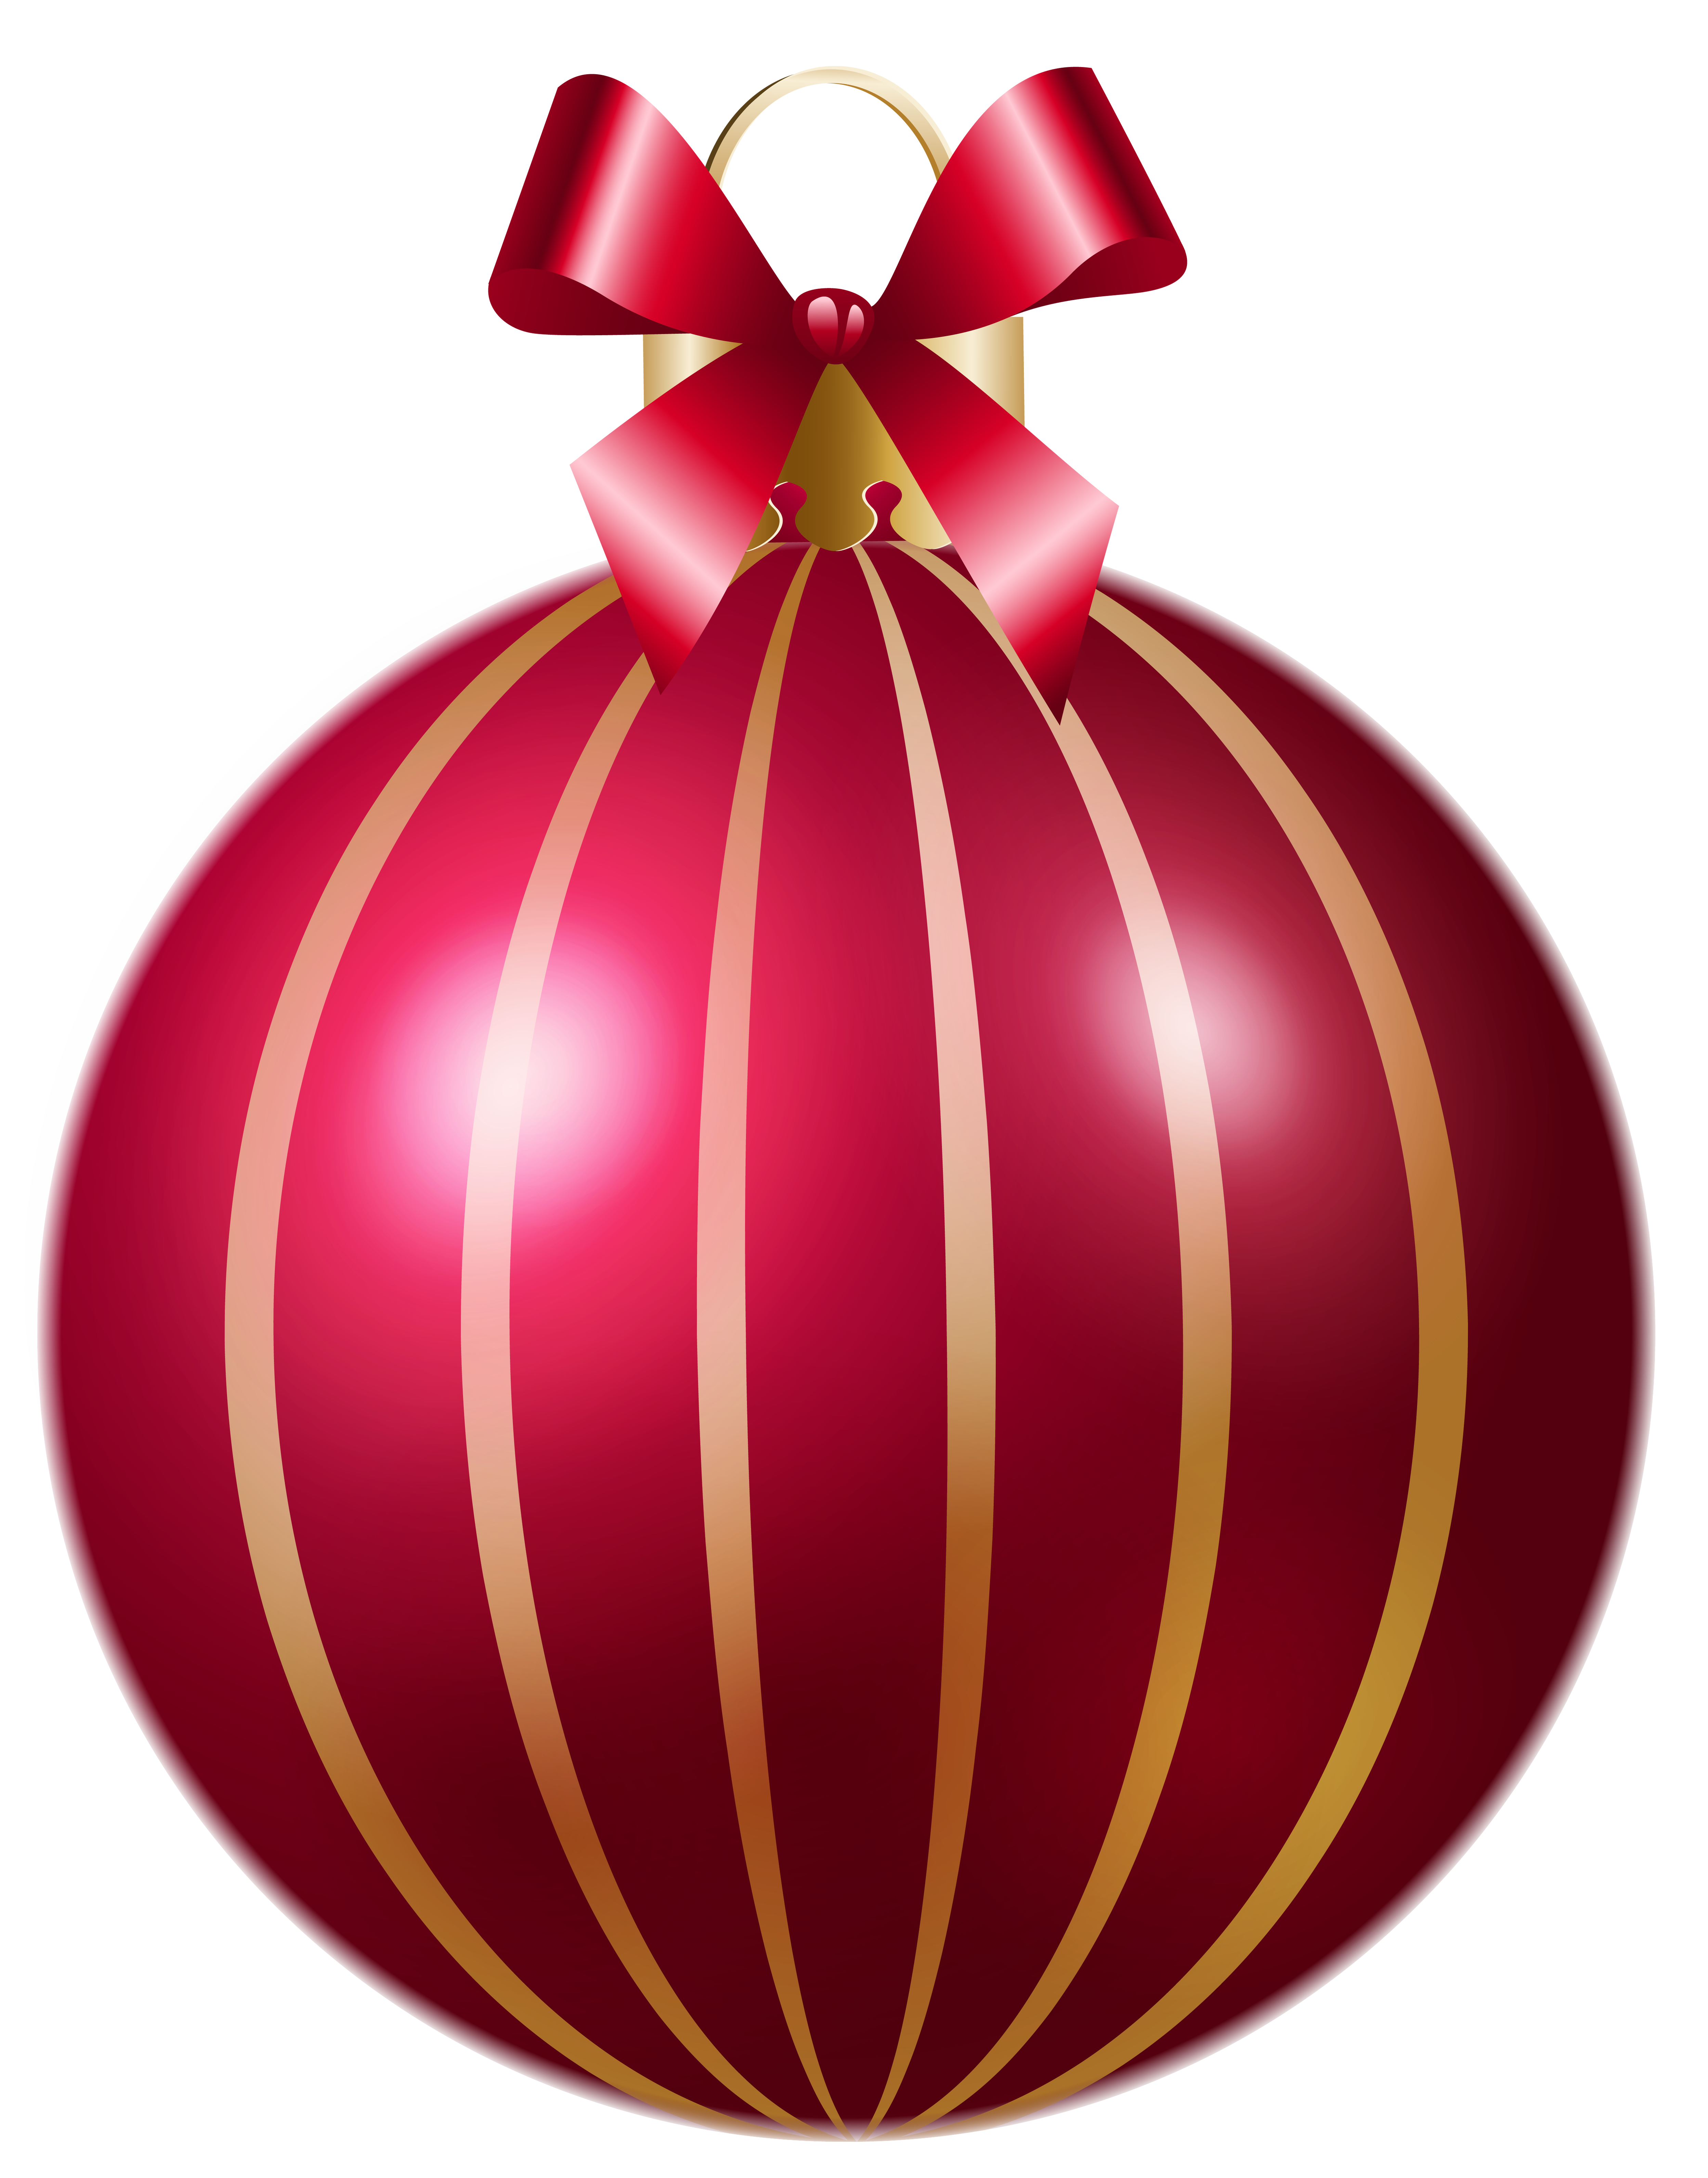 Striped Ball Ornament Christmas Red Free Photo PNG Clipart